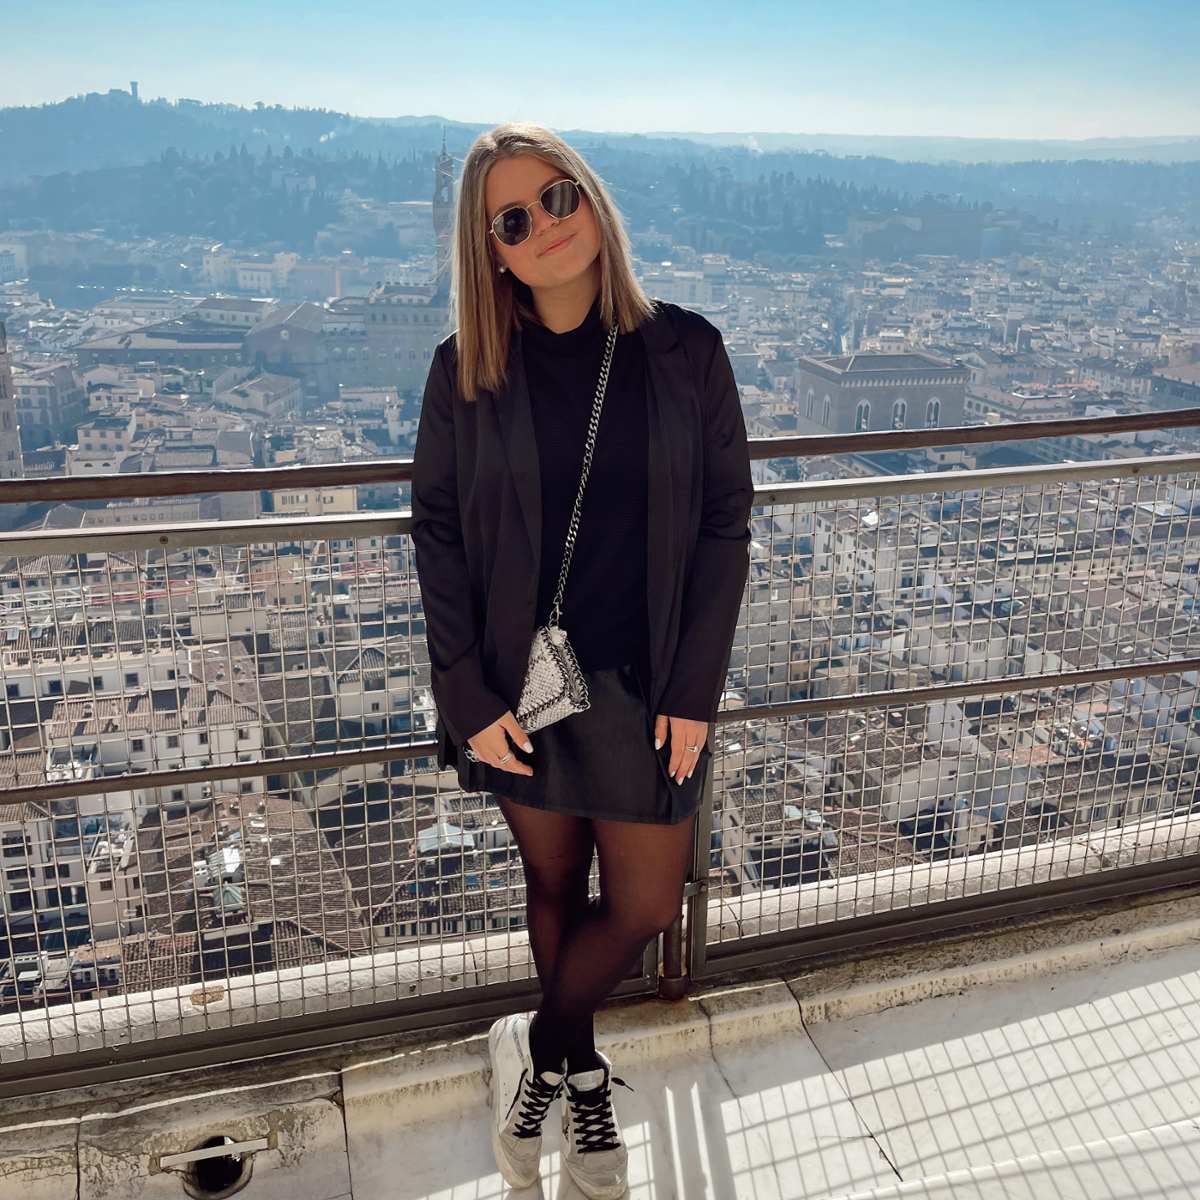 Samantha, wearing sunglasses, poses on a walkway. Distant mountains or hills and the buildings of the city of Florence are visible in the background